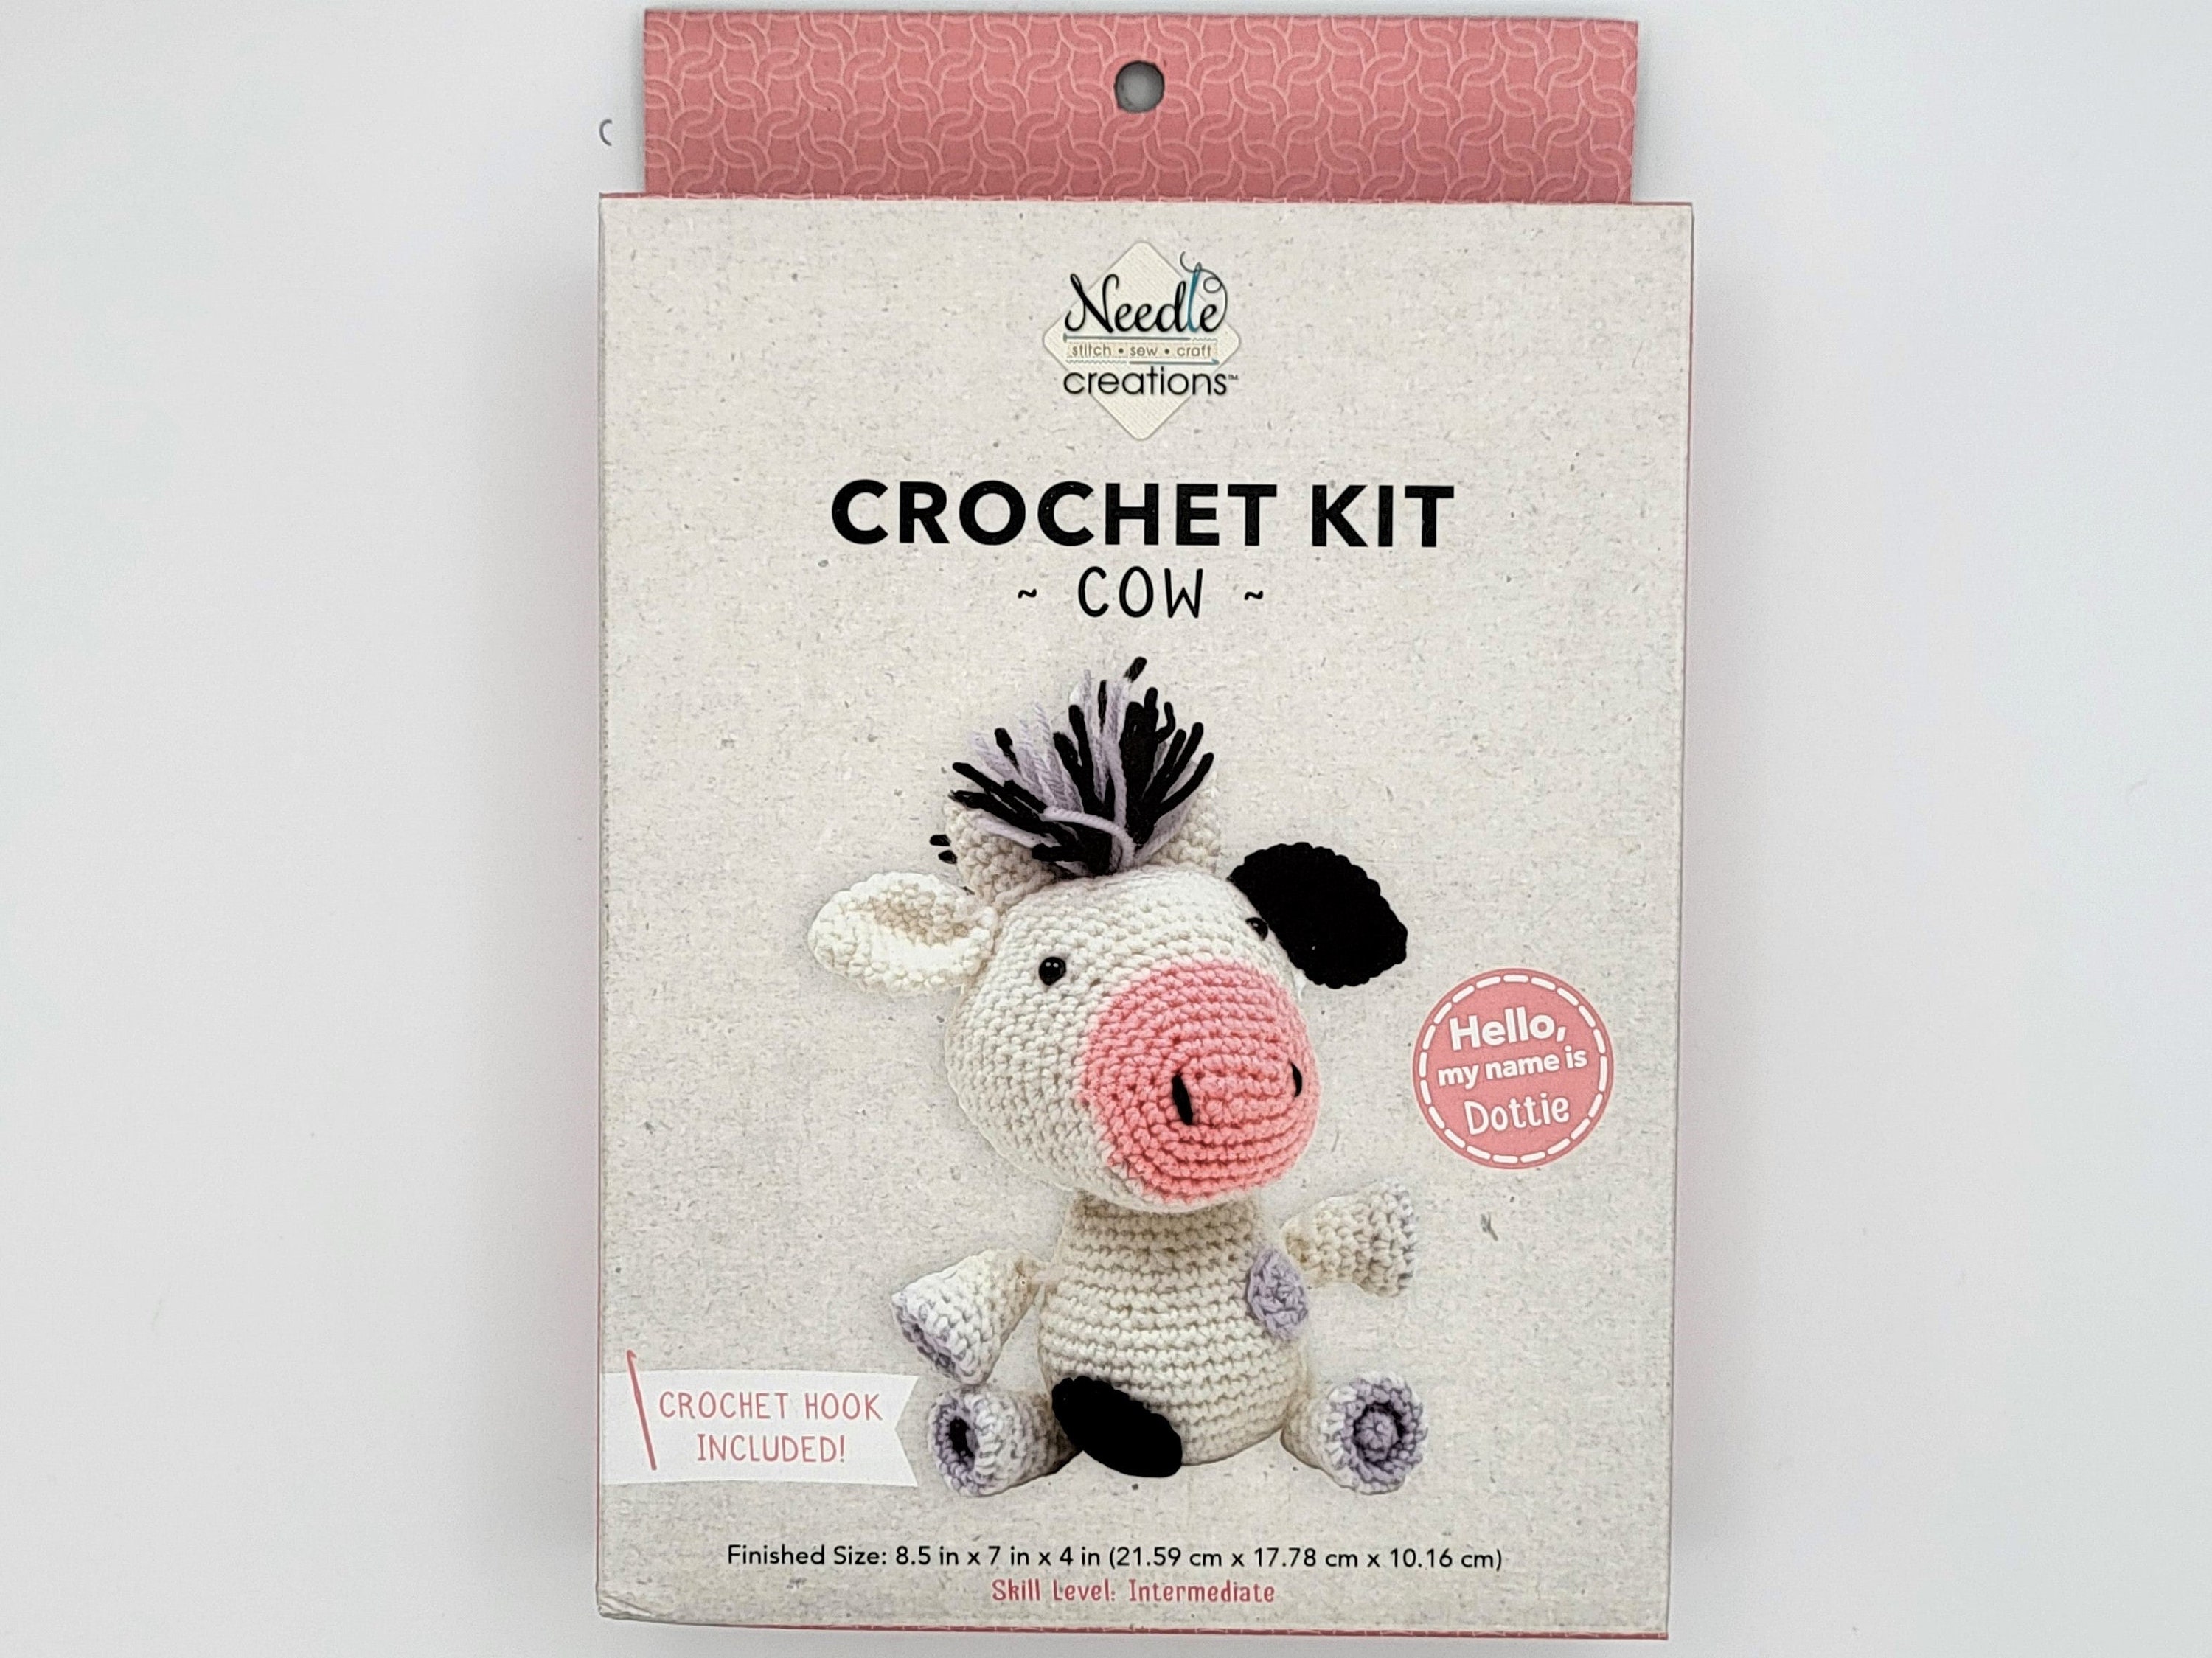 Fabric Editions Needle Creations Crochet Kit-Cow NCCRCHKT-COW